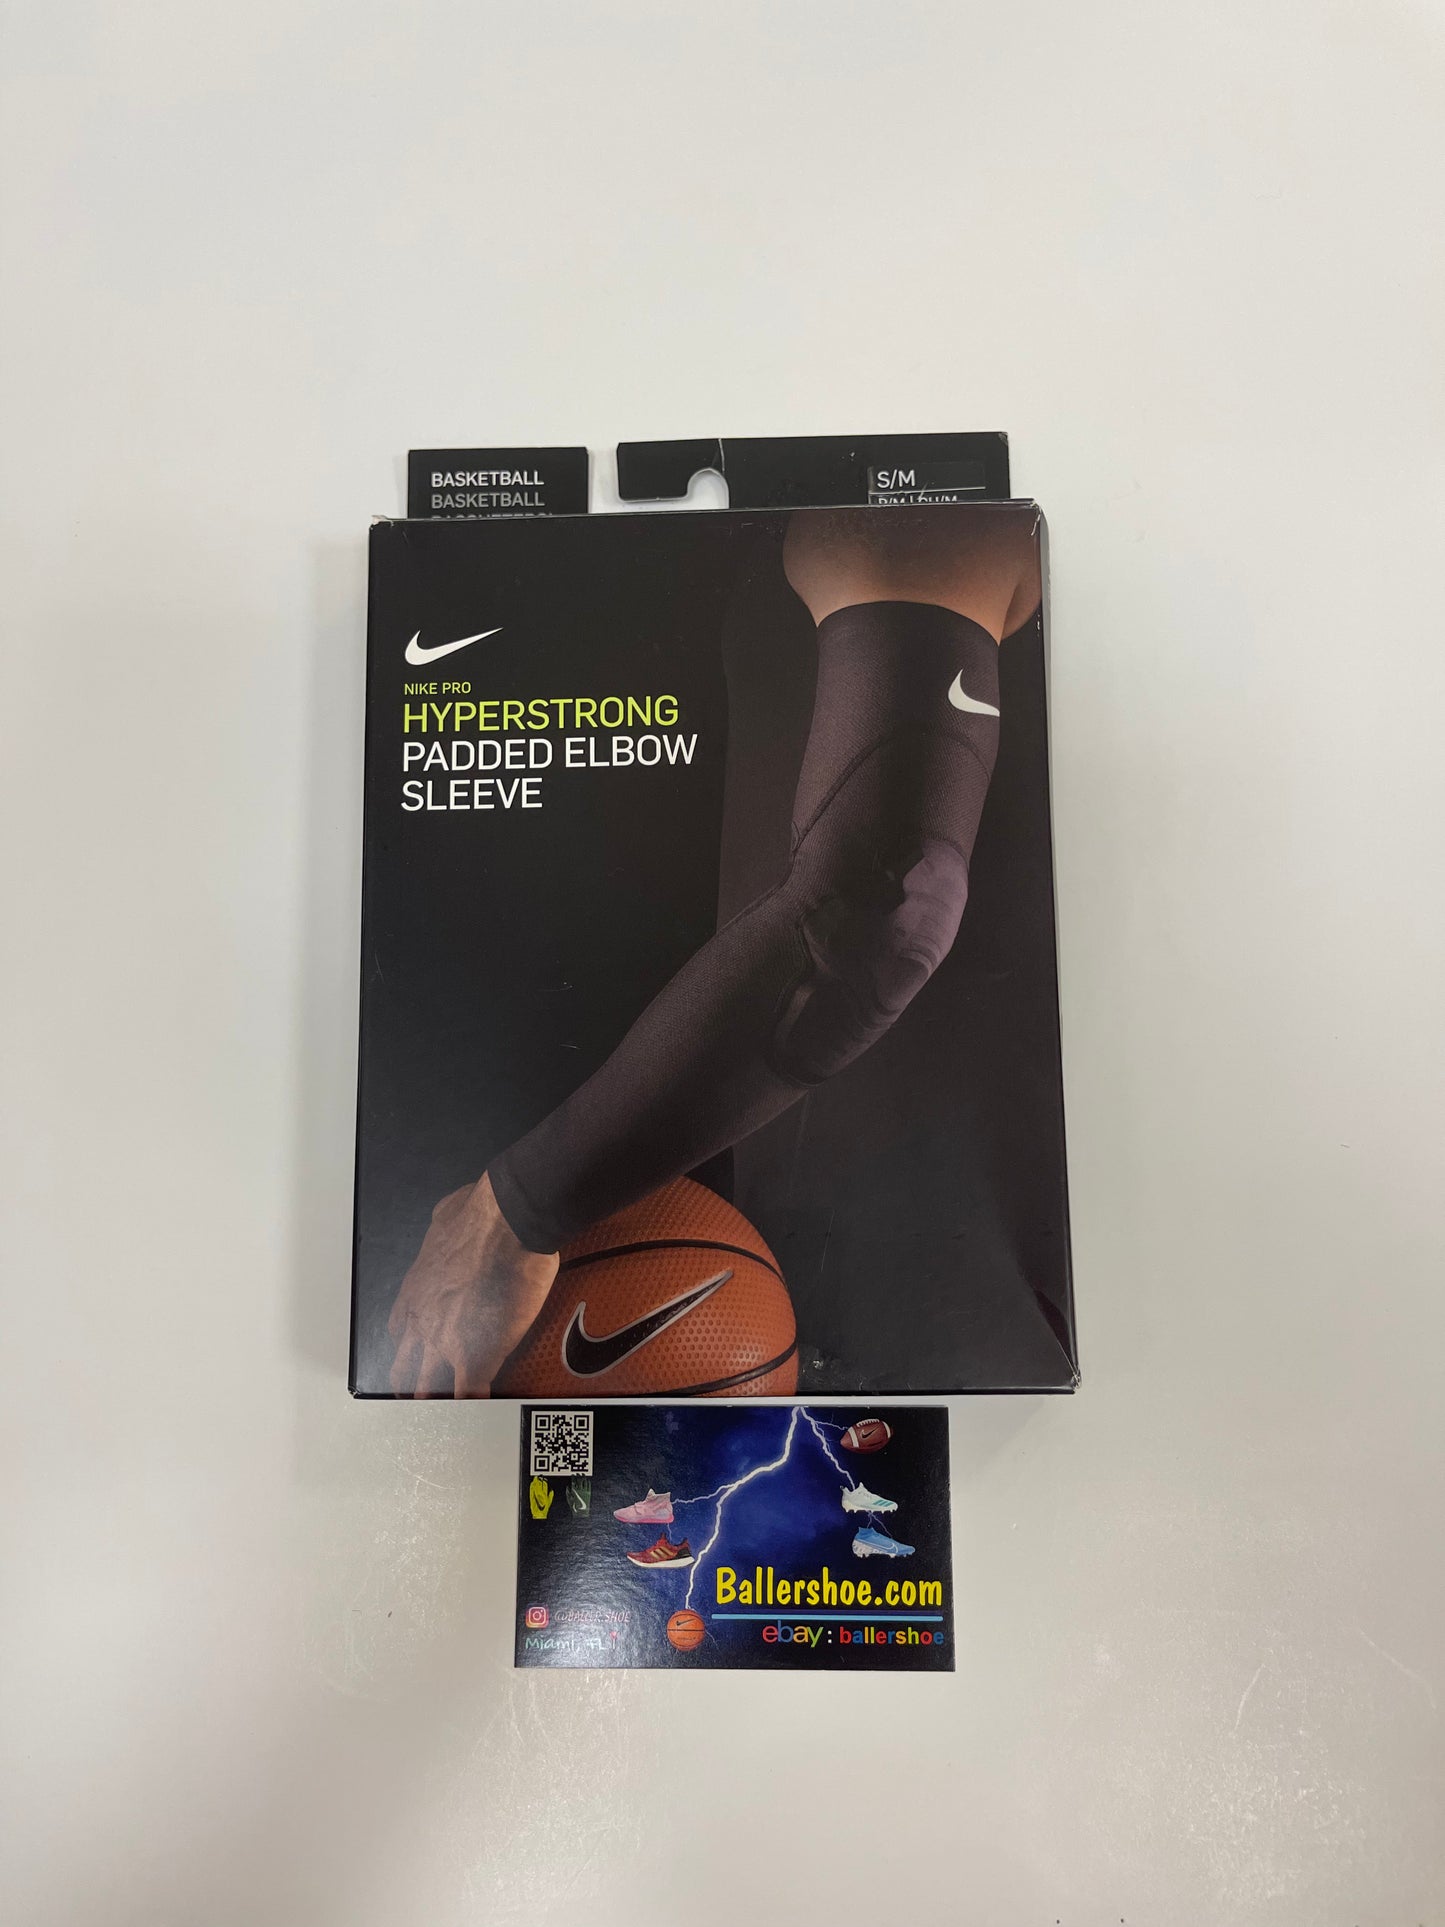 Nike Pro Hyperstrong Dri-Fit Padded Elbow Sleeve